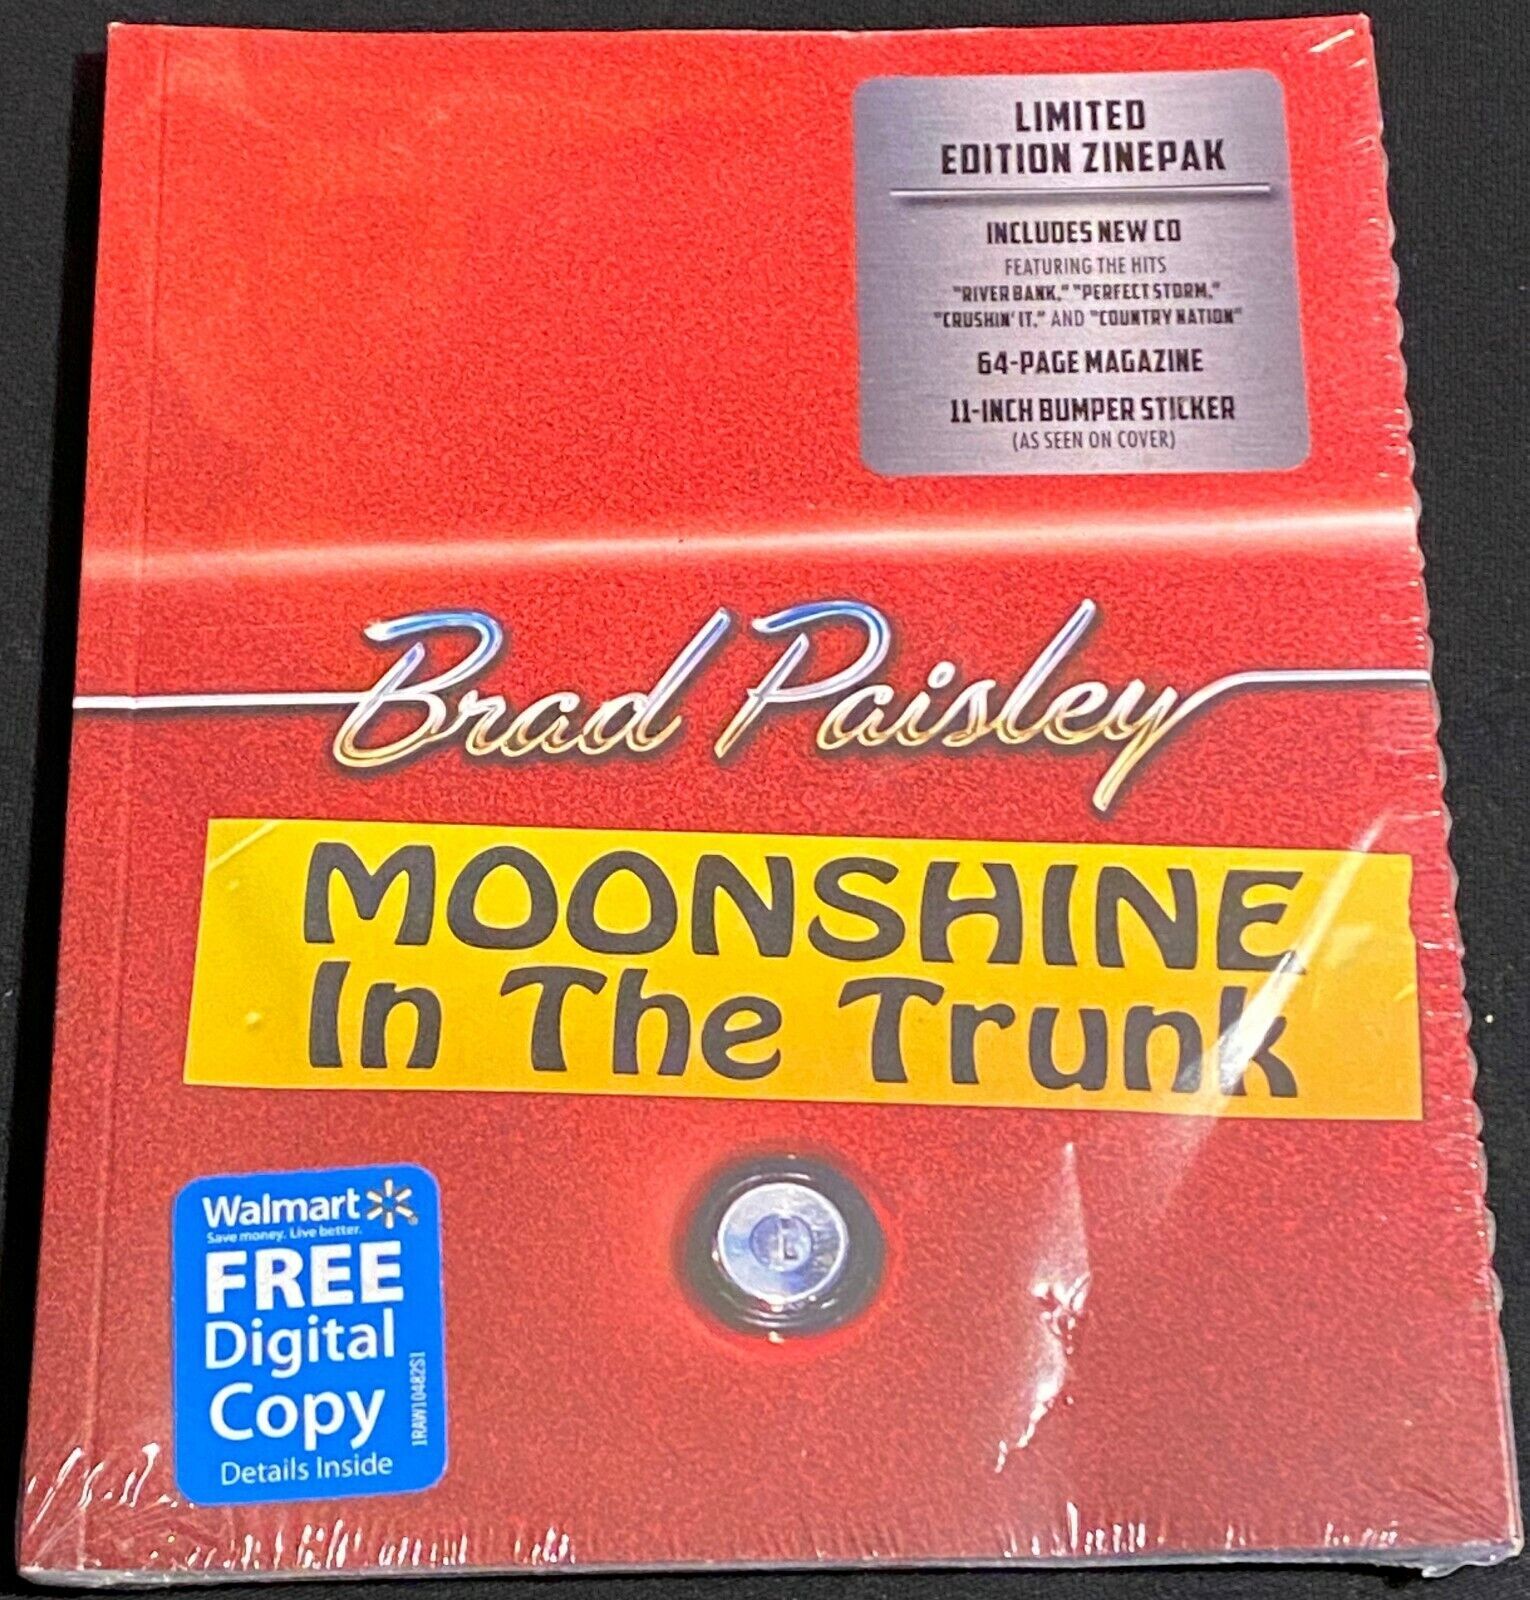 Brad Paisley - Moonshine In The Trunk CD (2014) New Limited Edition Zinepak